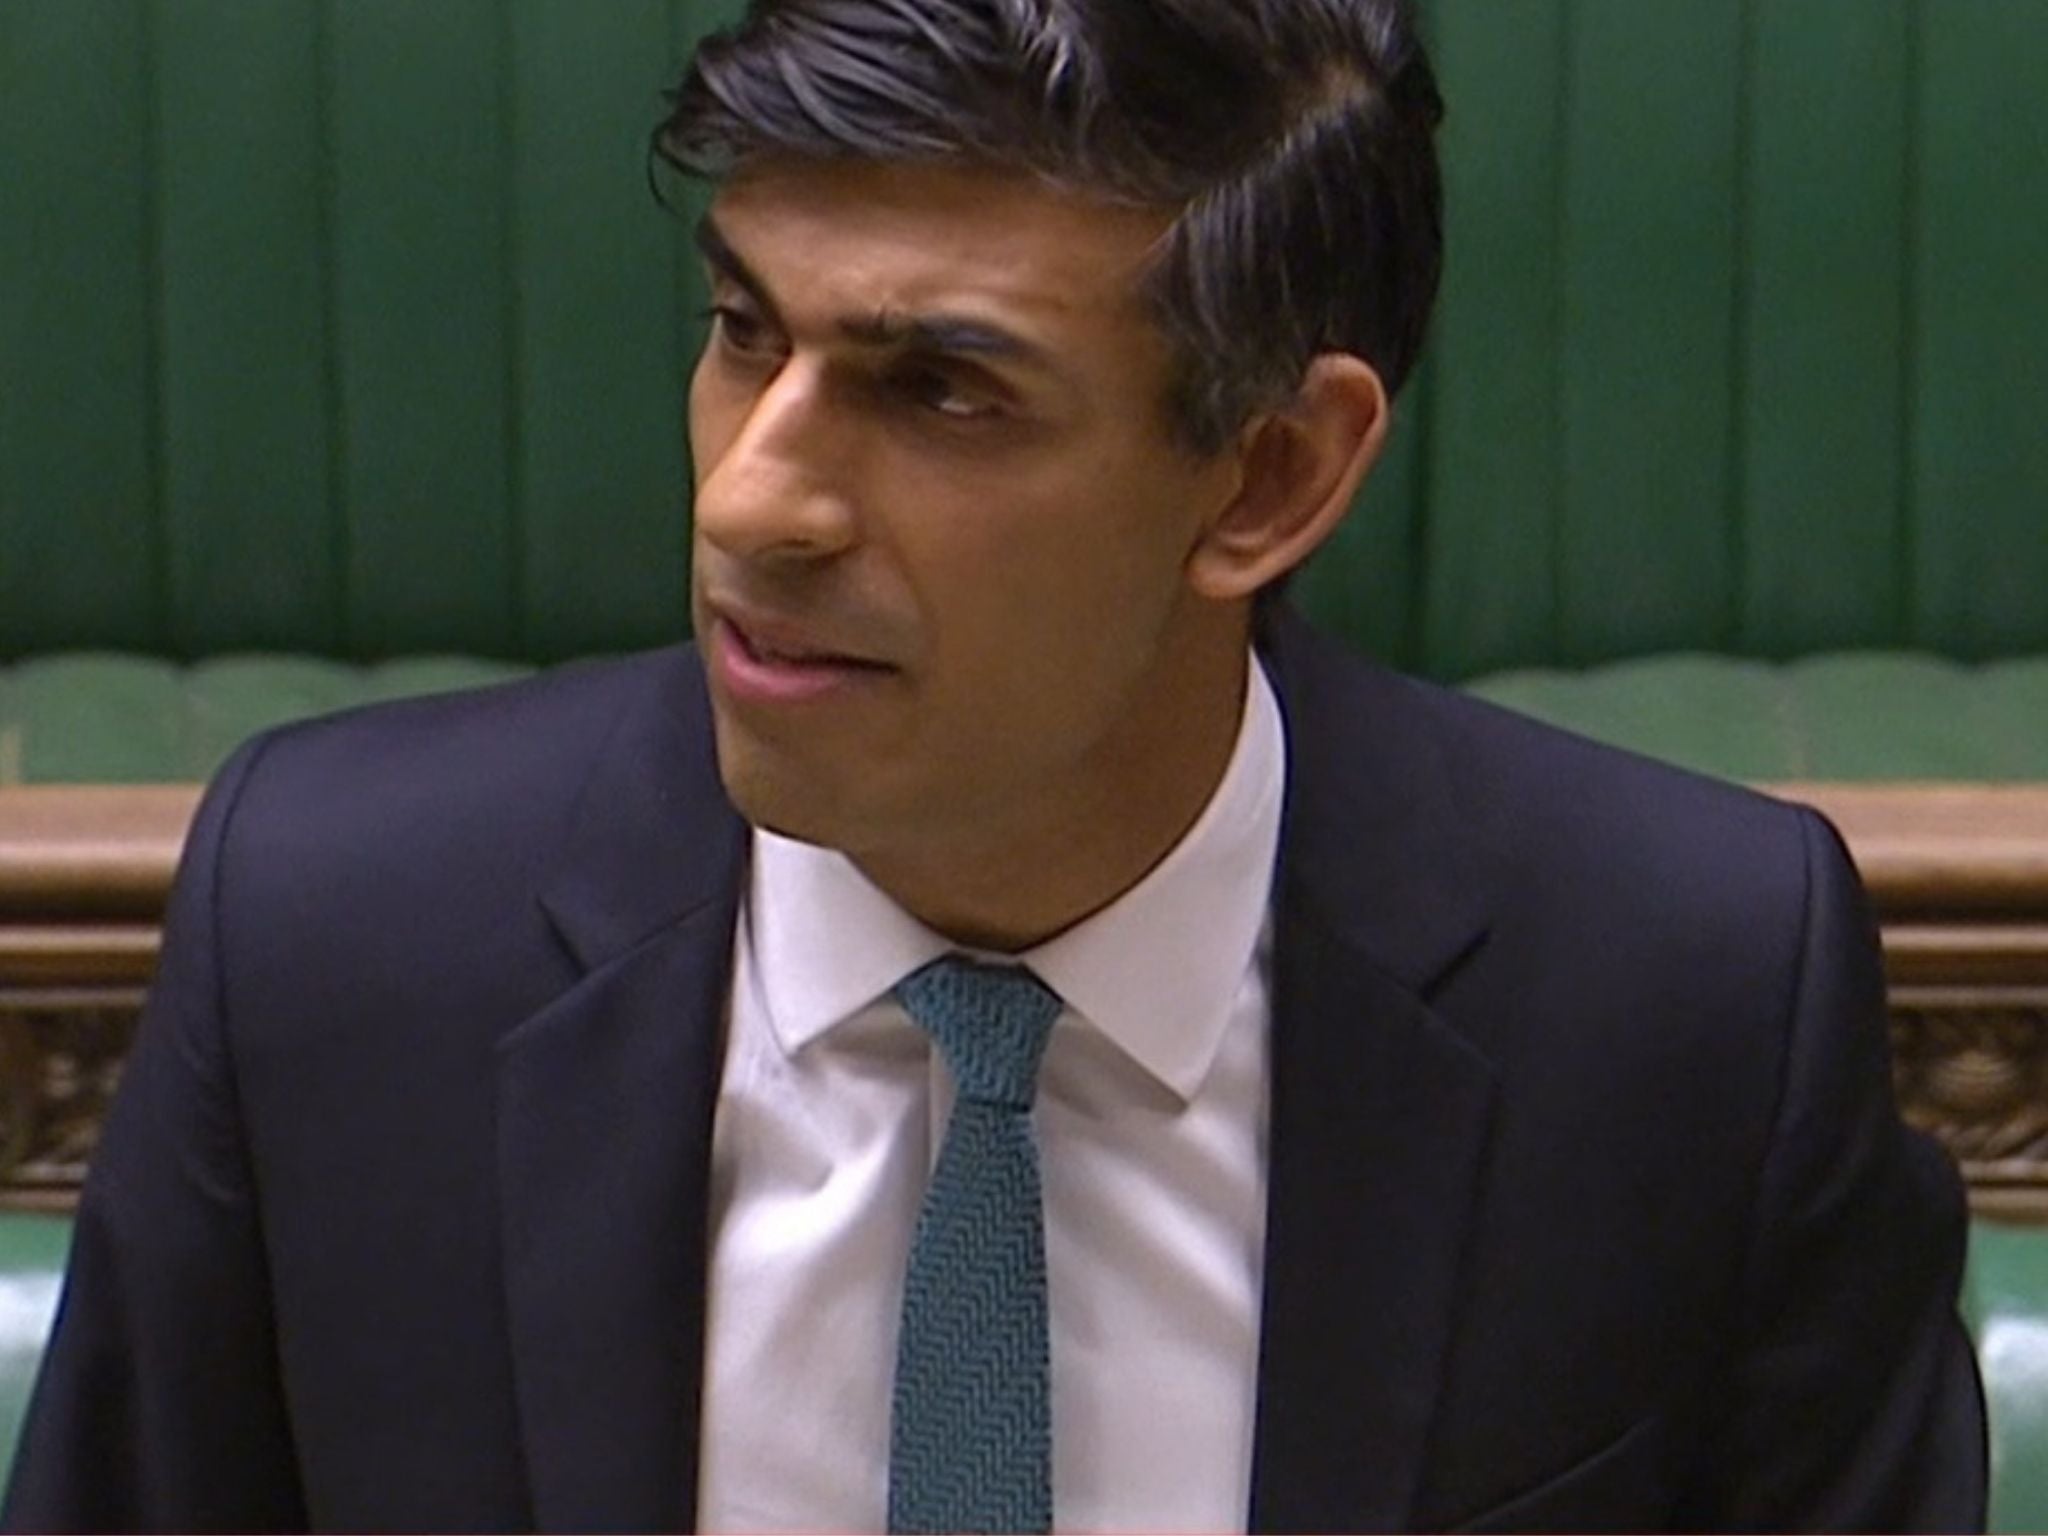 Rishi Sunak, chancellor of the exchequer, presents his comprehensive spending review